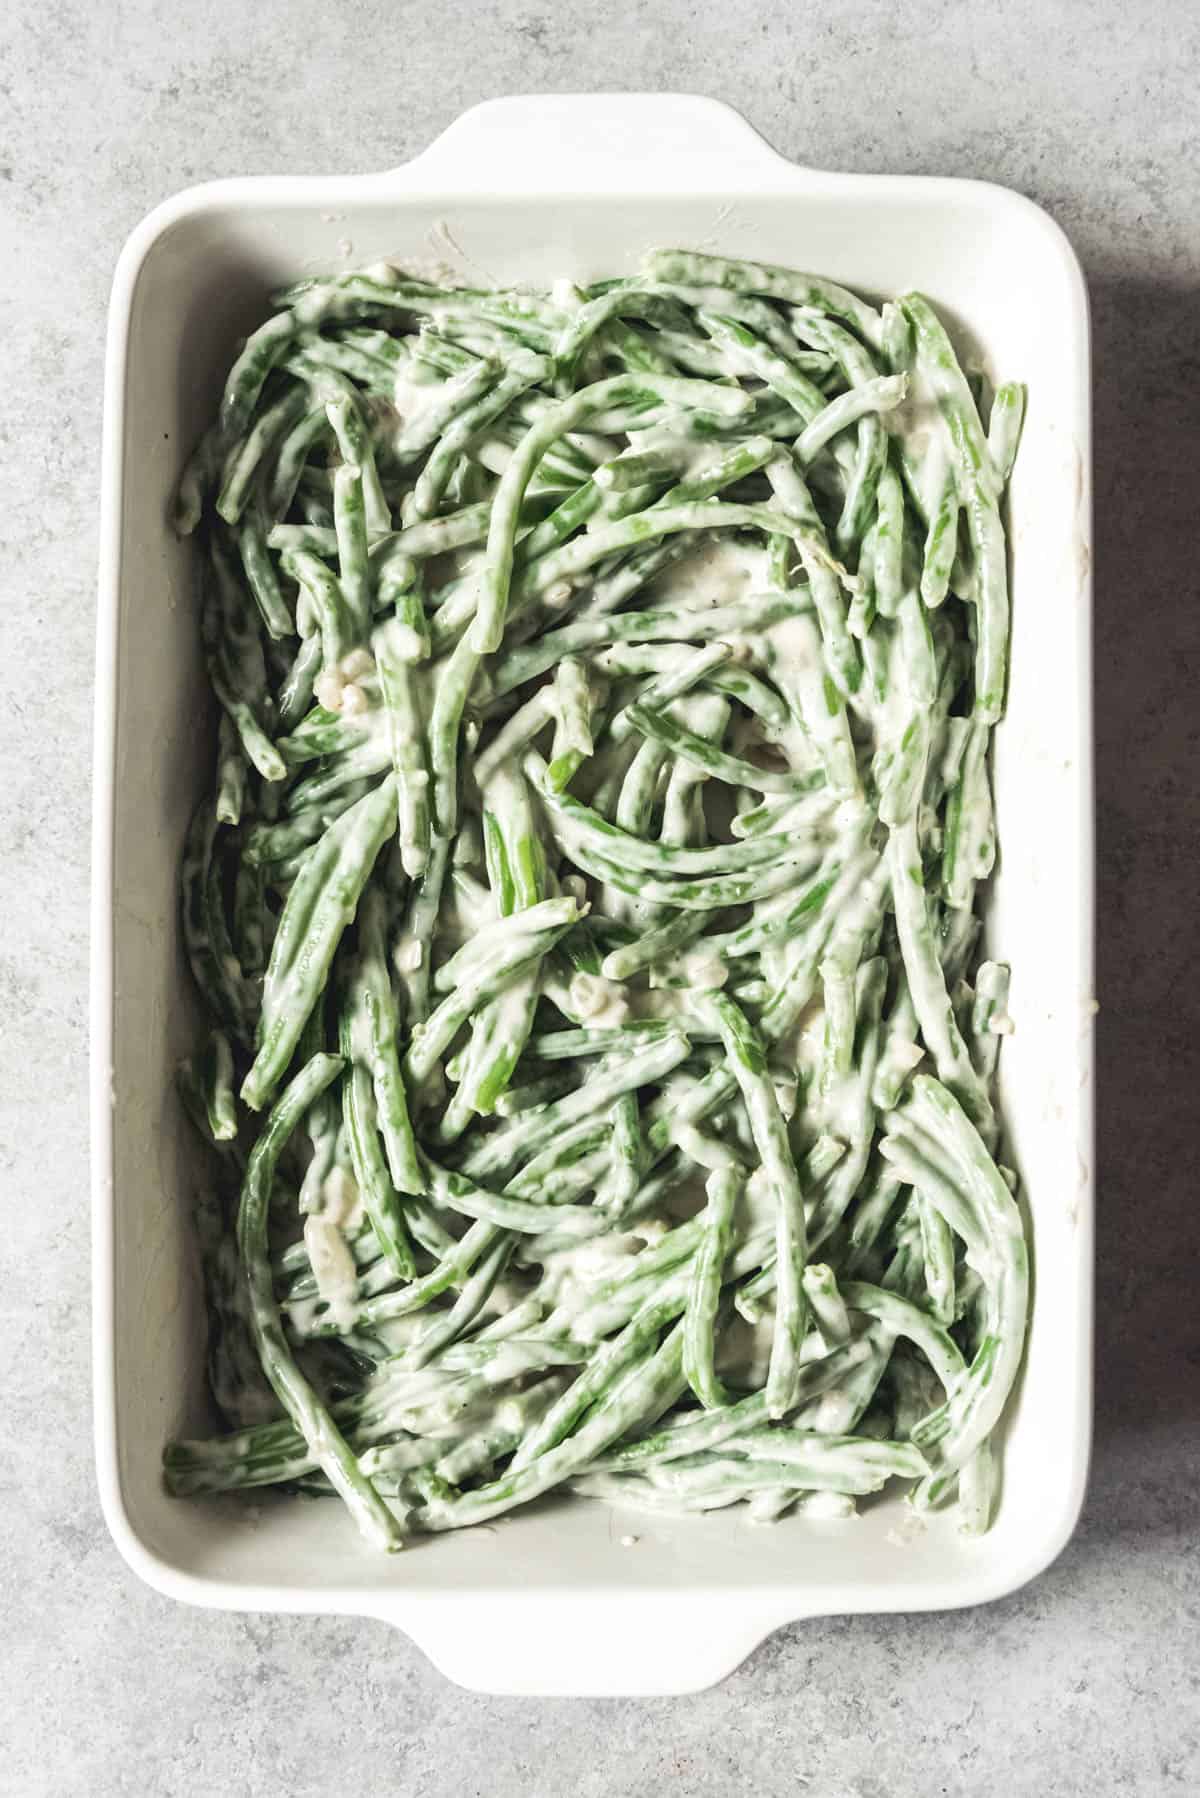 An image of make-ahead green bean casserole before adding the breadcrumbs and fried onions on top.